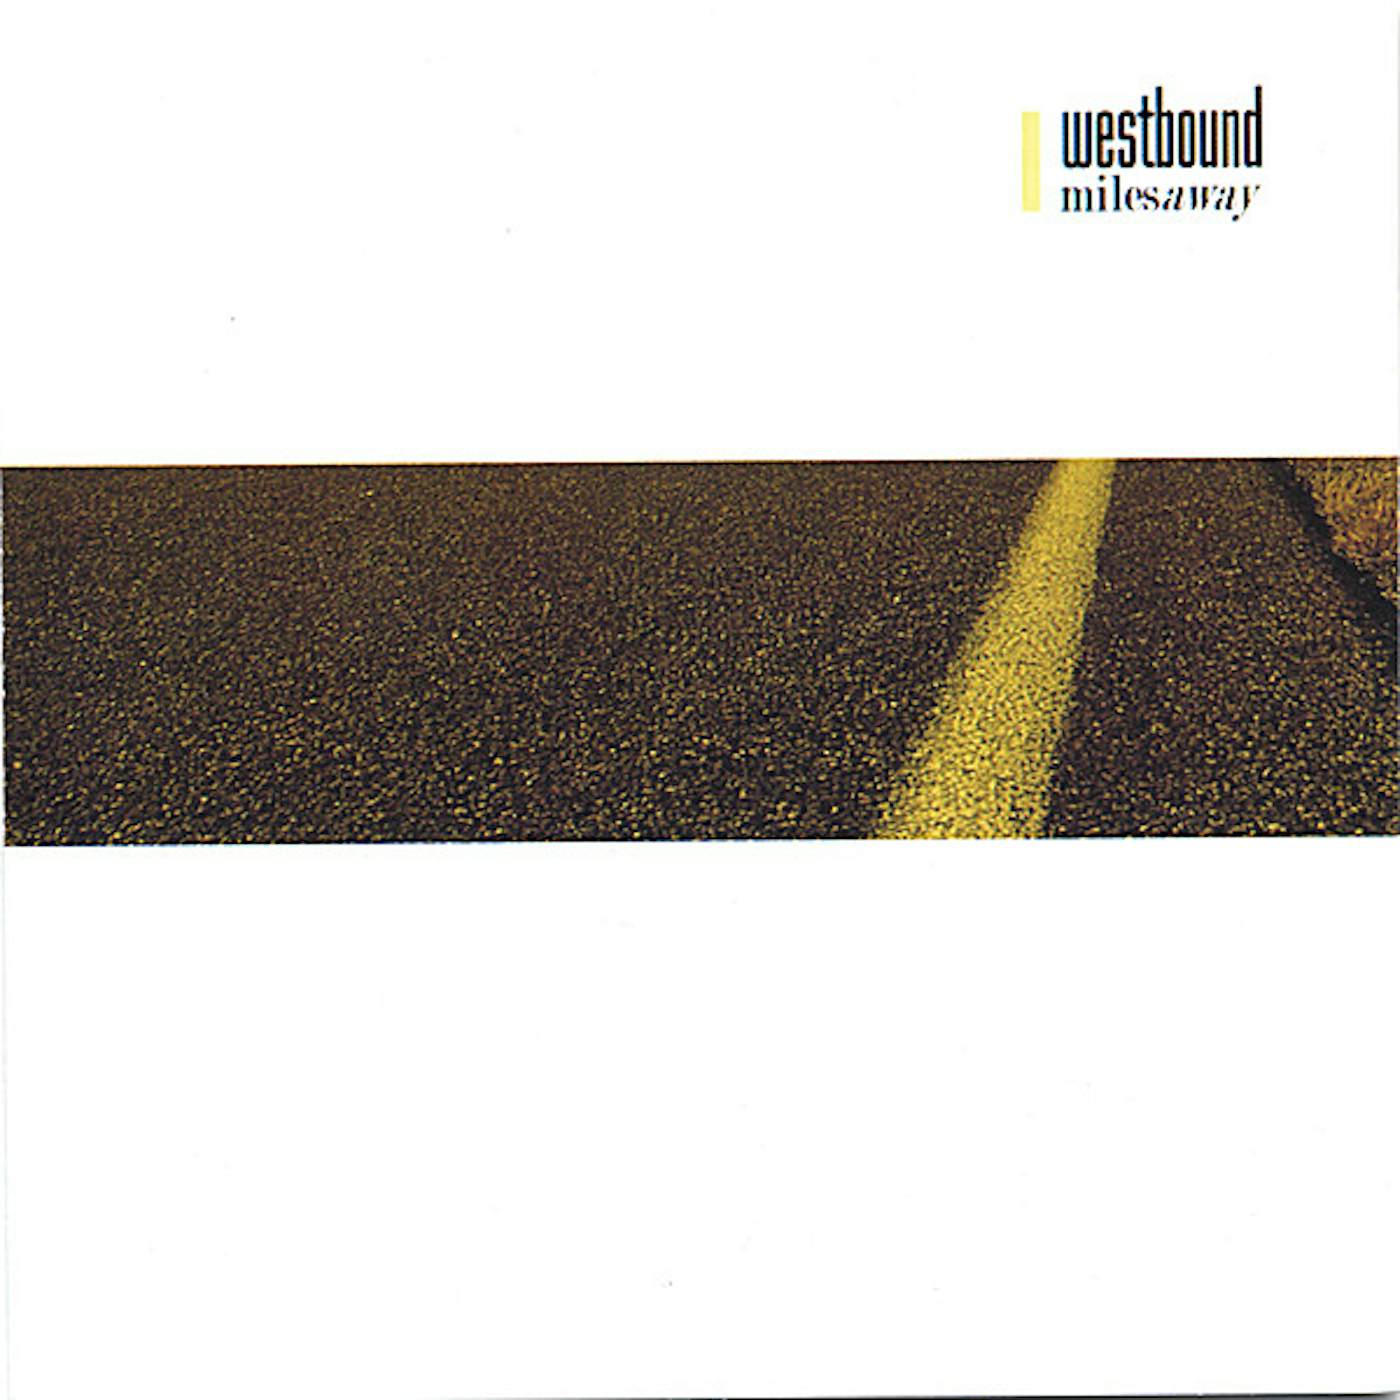 Westbound MILES AWAY CD